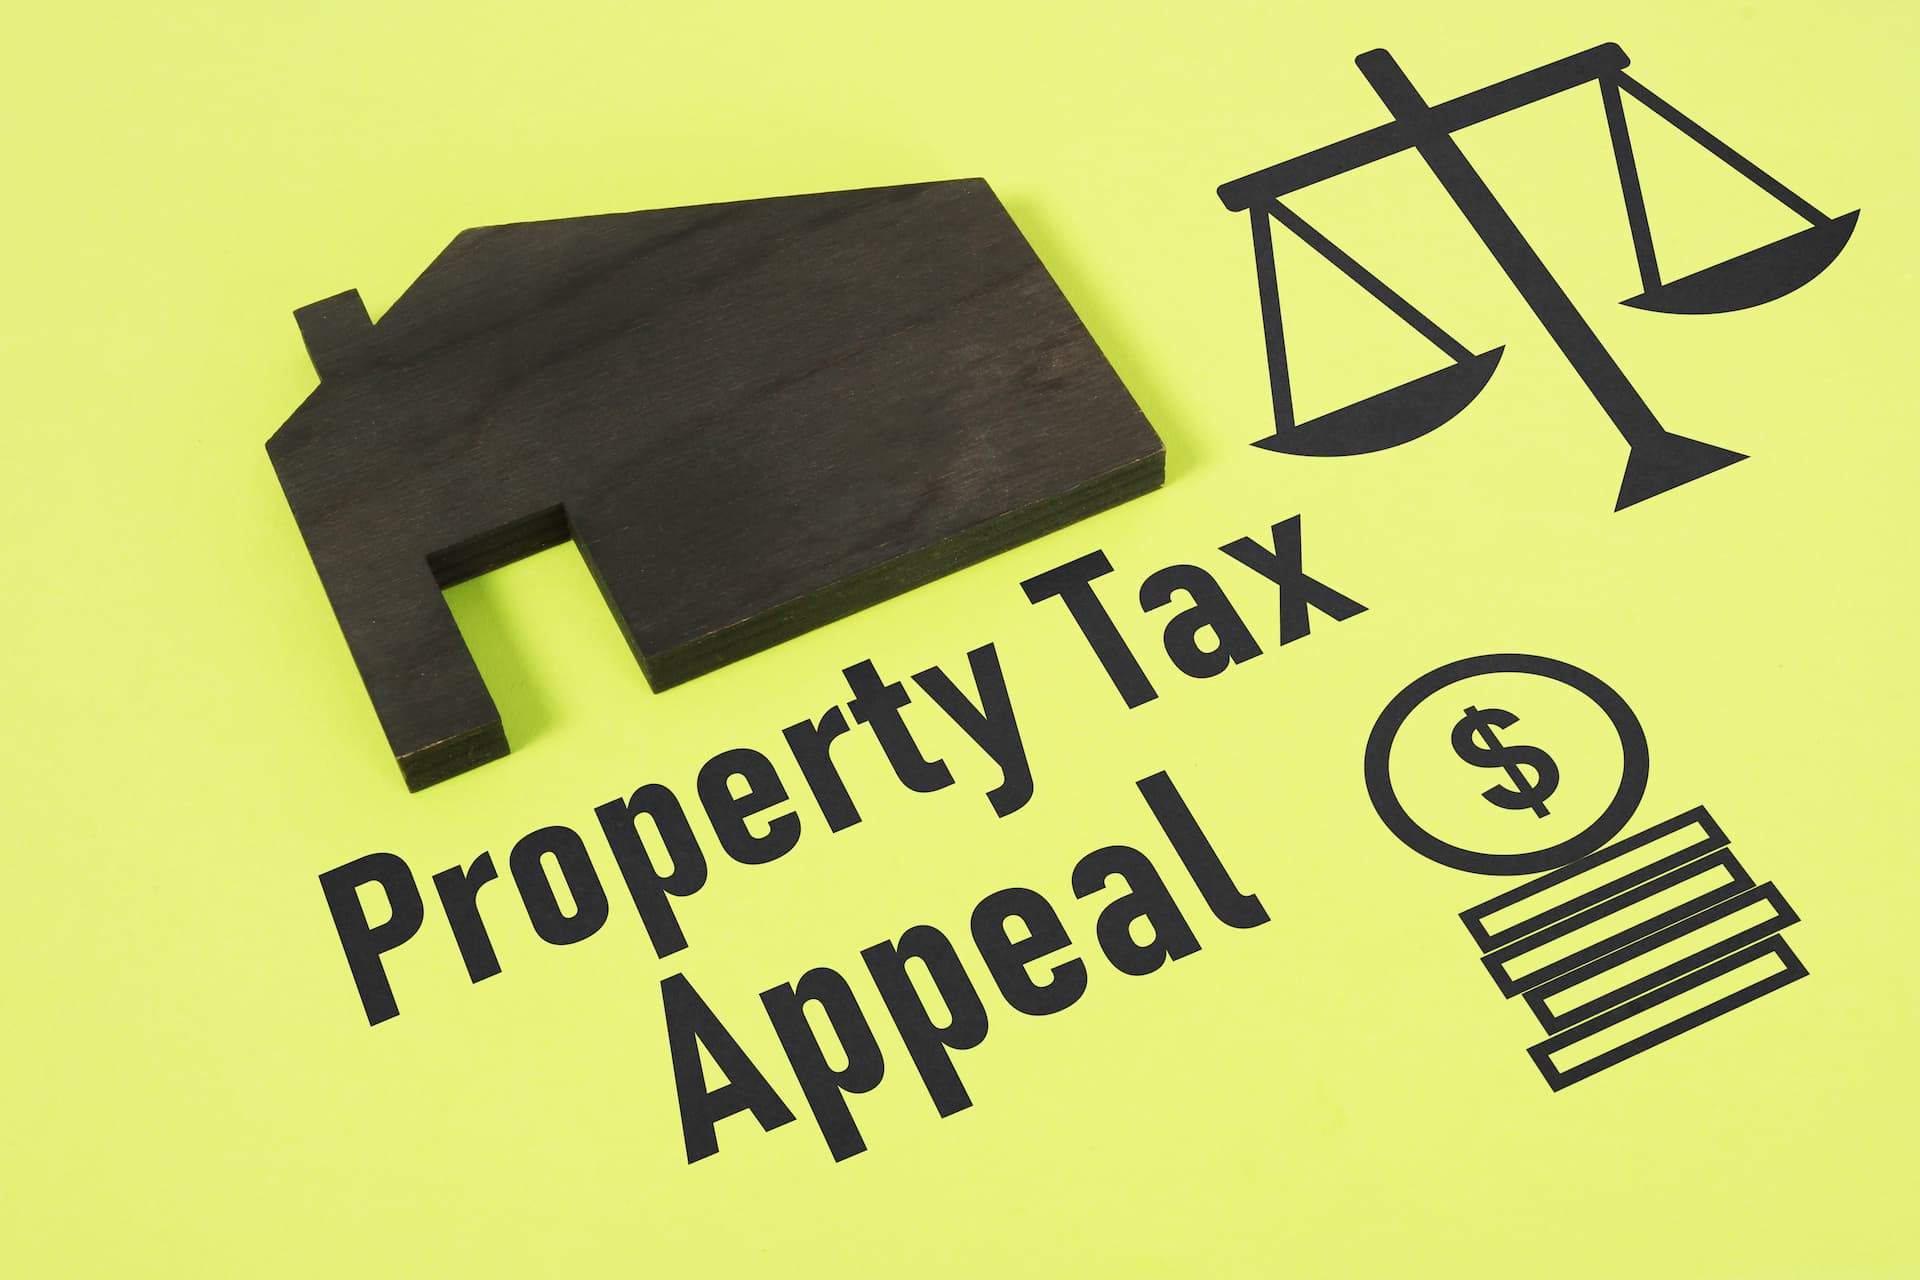 Property Tax Appeal